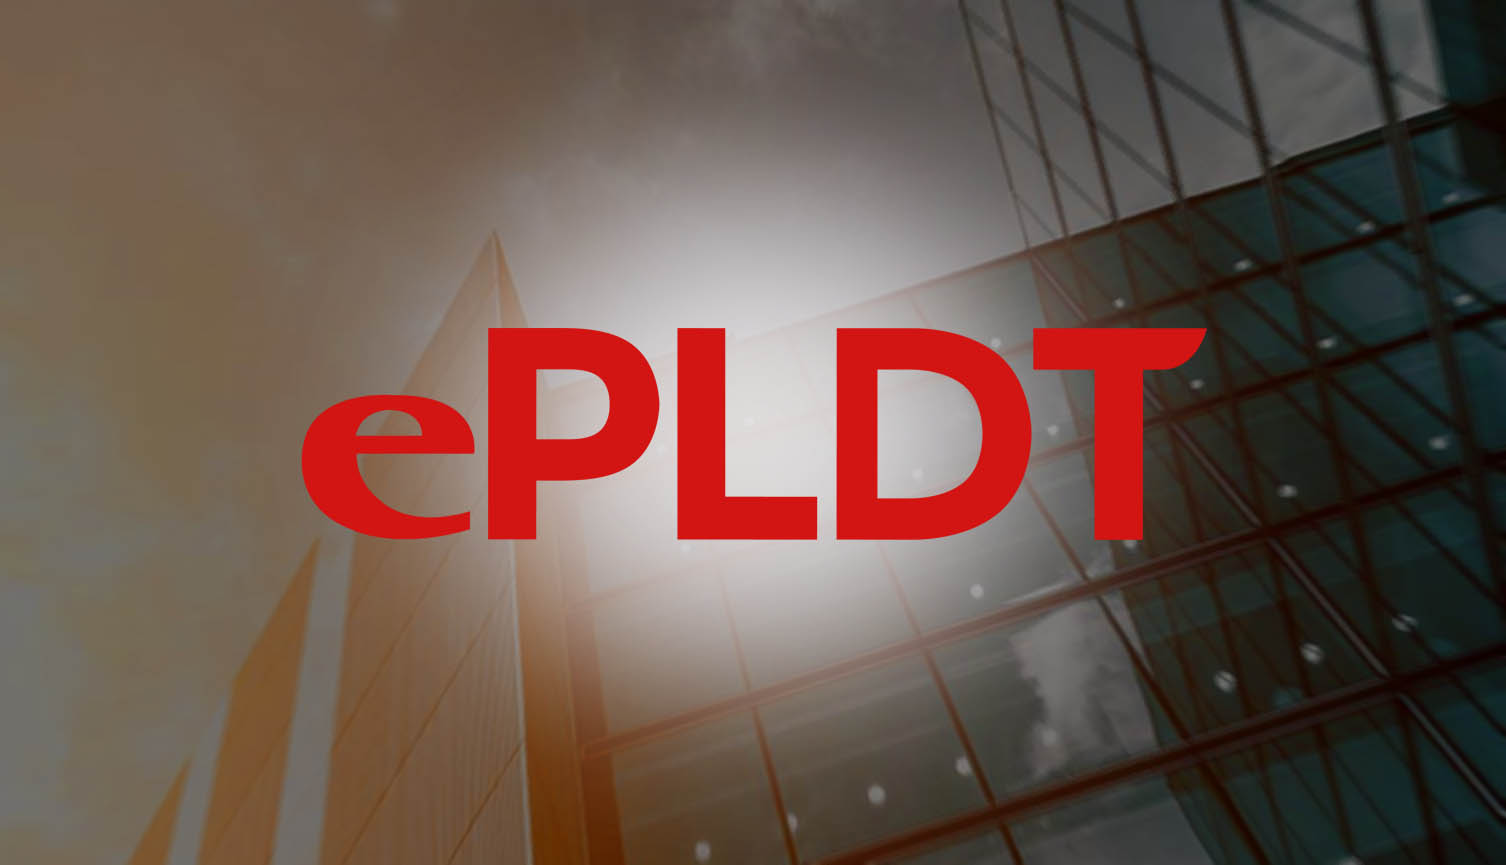 ePLDT recognized as one of the top direct cloud service providers in the Philippines